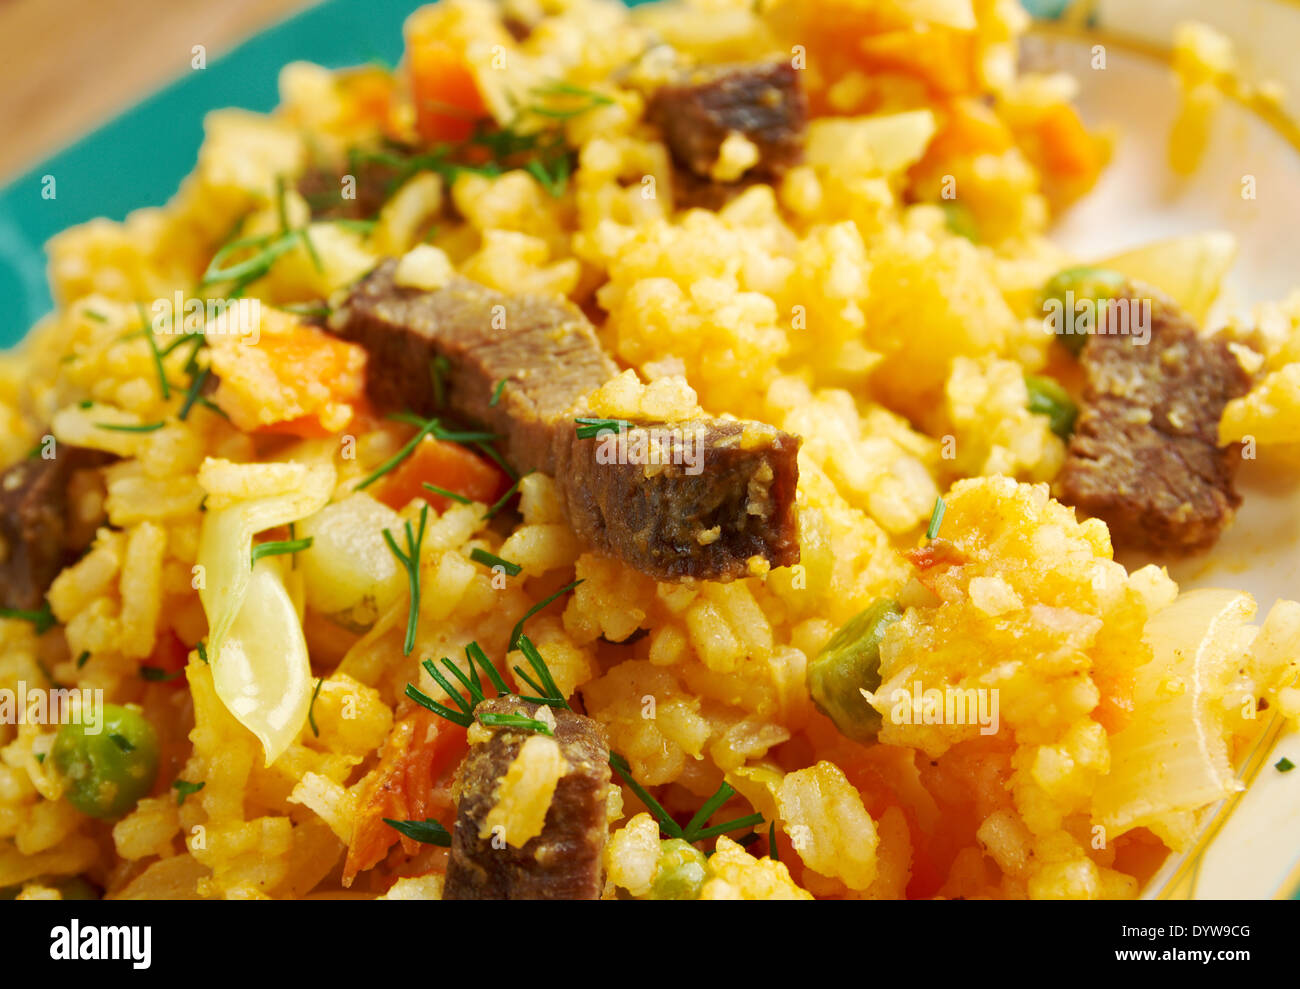 arroz chino colombiana - Fried Rice with Vegetables and Meat.southern food Stock Photo